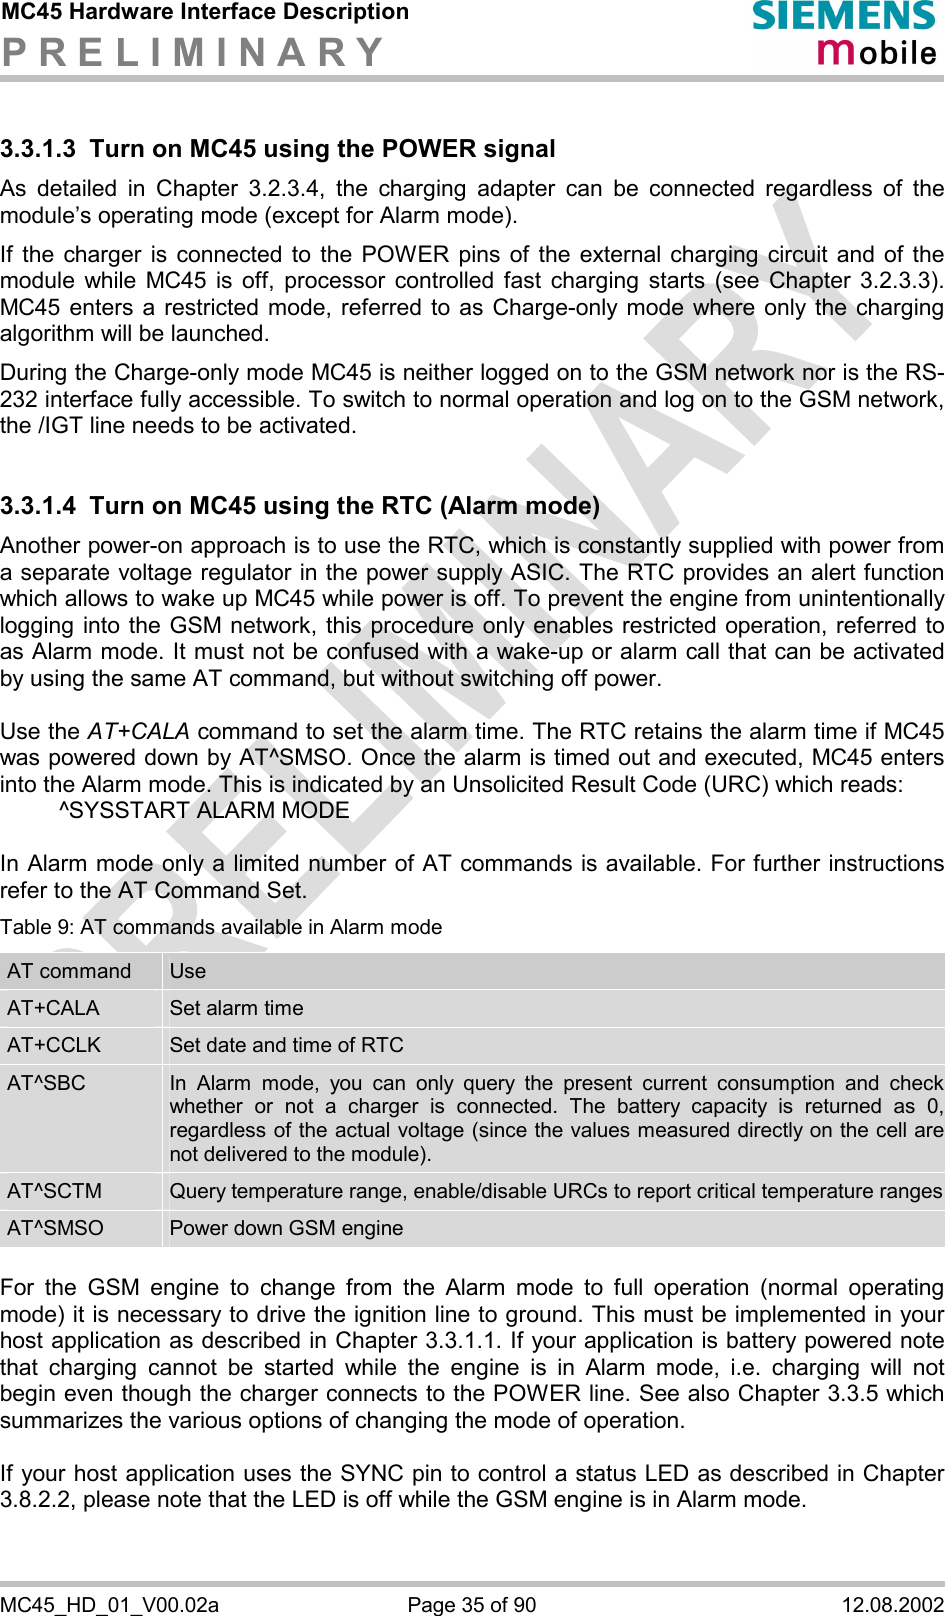 MC45 Hardware Interface Description P R E L I M I N A R Y      MC45_HD_01_V00.02a  Page 35 of 90  12.08.2002 3.3.1.3  Turn on MC45 using the POWER signal As detailed in Chapter 3.2.3.4, the charging adapter can be connected regardless of the module’s operating mode (except for Alarm mode).  If the charger is connected to the POWER pins of the external charging circuit and of the module while MC45 is off, processor controlled fast charging starts (see Chapter 3.2.3.3). MC45 enters a restricted mode, referred to as Charge-only mode where only the charging algorithm will be launched. During the Charge-only mode MC45 is neither logged on to the GSM network nor is the RS-232 interface fully accessible. To switch to normal operation and log on to the GSM network, the /IGT line needs to be activated.  3.3.1.4  Turn on MC45 using the RTC (Alarm mode) Another power-on approach is to use the RTC, which is constantly supplied with power from a separate voltage regulator in the power supply ASIC. The RTC provides an alert function which allows to wake up MC45 while power is off. To prevent the engine from unintentionally logging into the GSM network, this procedure only enables restricted operation, referred to as Alarm mode. It must not be confused with a wake-up or alarm call that can be activated by using the same AT command, but without switching off power.  Use the AT+CALA command to set the alarm time. The RTC retains the alarm time if MC45 was powered down by AT^SMSO. Once the alarm is timed out and executed, MC45 enters into the Alarm mode. This is indicated by an Unsolicited Result Code (URC) which reads:   ^SYSSTART ALARM MODE    In Alarm mode only a limited number of AT commands is available. For further instructions refer to the AT Command Set. Table 9: AT commands available in Alarm mode AT command  Use AT+CALA  Set alarm time AT+CCLK  Set date and time of RTC AT^SBC  In Alarm mode, you can only query the present current consumption and check whether or not a charger is connected. The battery capacity is returned as 0, regardless of the actual voltage (since the values measured directly on the cell are not delivered to the module). AT^SCTM  Query temperature range, enable/disable URCs to report critical temperature rangesAT^SMSO  Power down GSM engine  For the GSM engine to change from the Alarm mode to full operation (normal operating mode) it is necessary to drive the ignition line to ground. This must be implemented in your host application as described in Chapter 3.3.1.1. If your application is battery powered note that charging cannot be started while the engine is in Alarm mode, i.e. charging will not begin even though the charger connects to the POWER line. See also Chapter 3.3.5 which summarizes the various options of changing the mode of operation.  If your host application uses the SYNC pin to control a status LED as described in Chapter 3.8.2.2, please note that the LED is off while the GSM engine is in Alarm mode. 